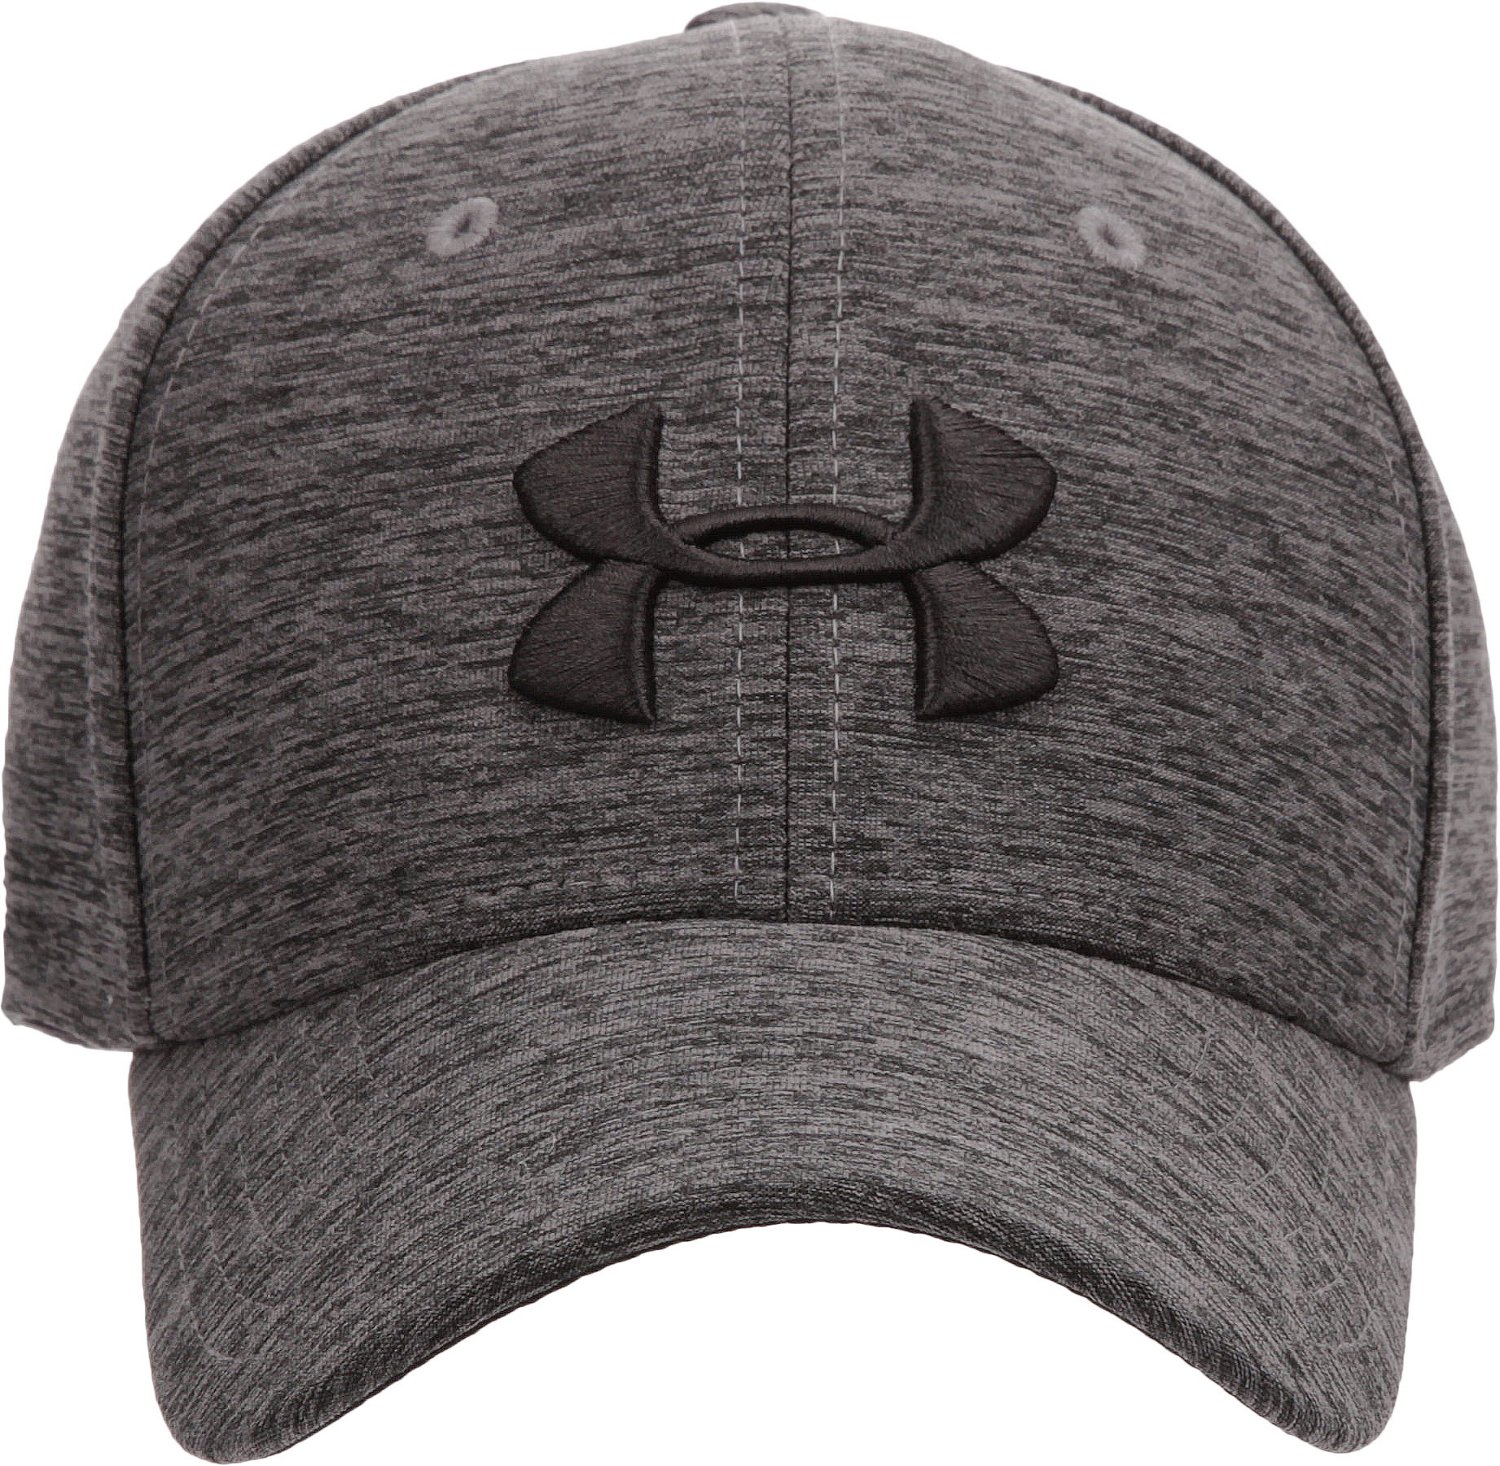 Cheap under armour skull cap youth Buy 